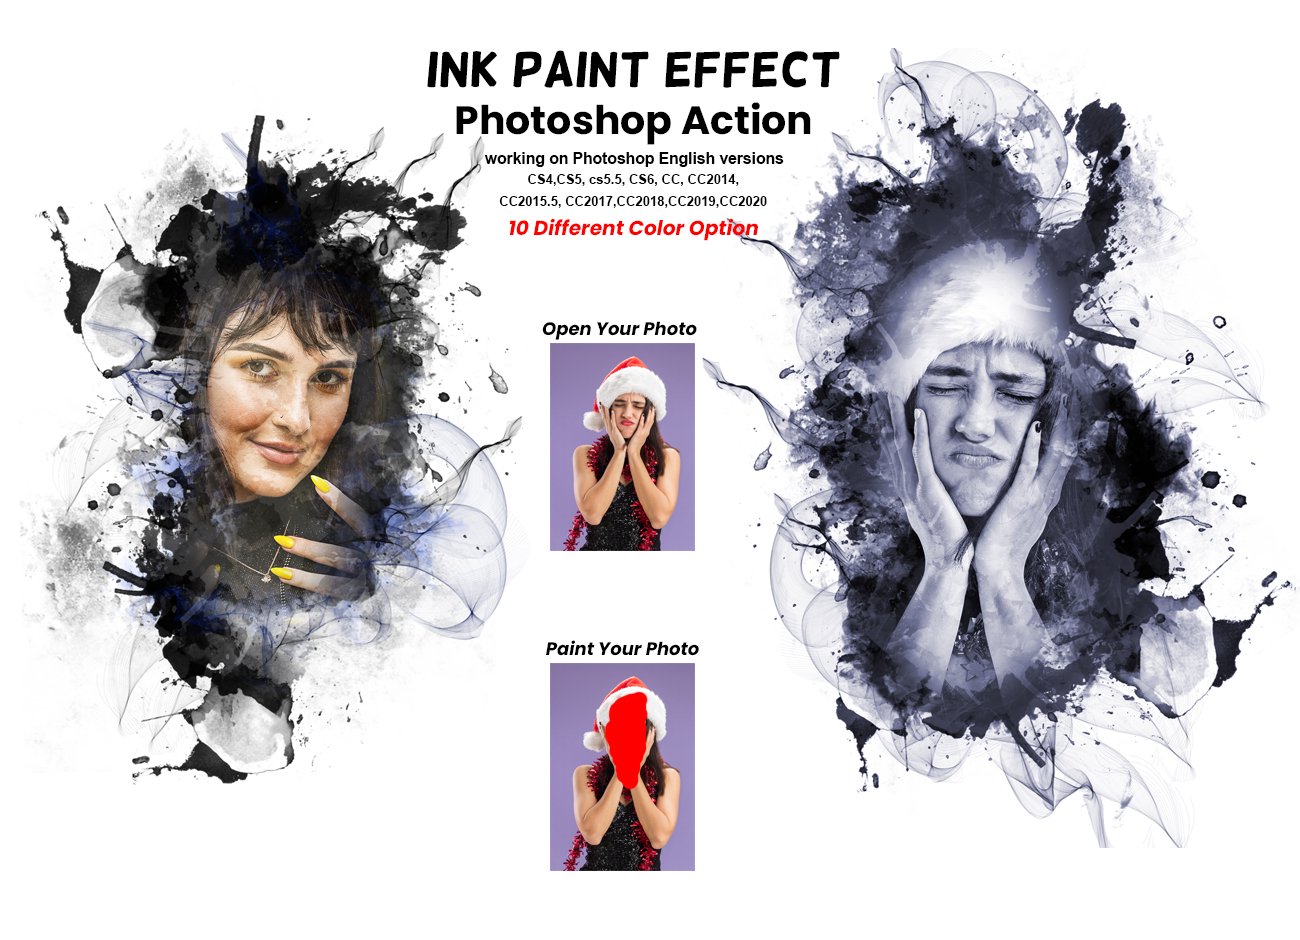 Ink Paint Effect Photoshop Actioncover image.